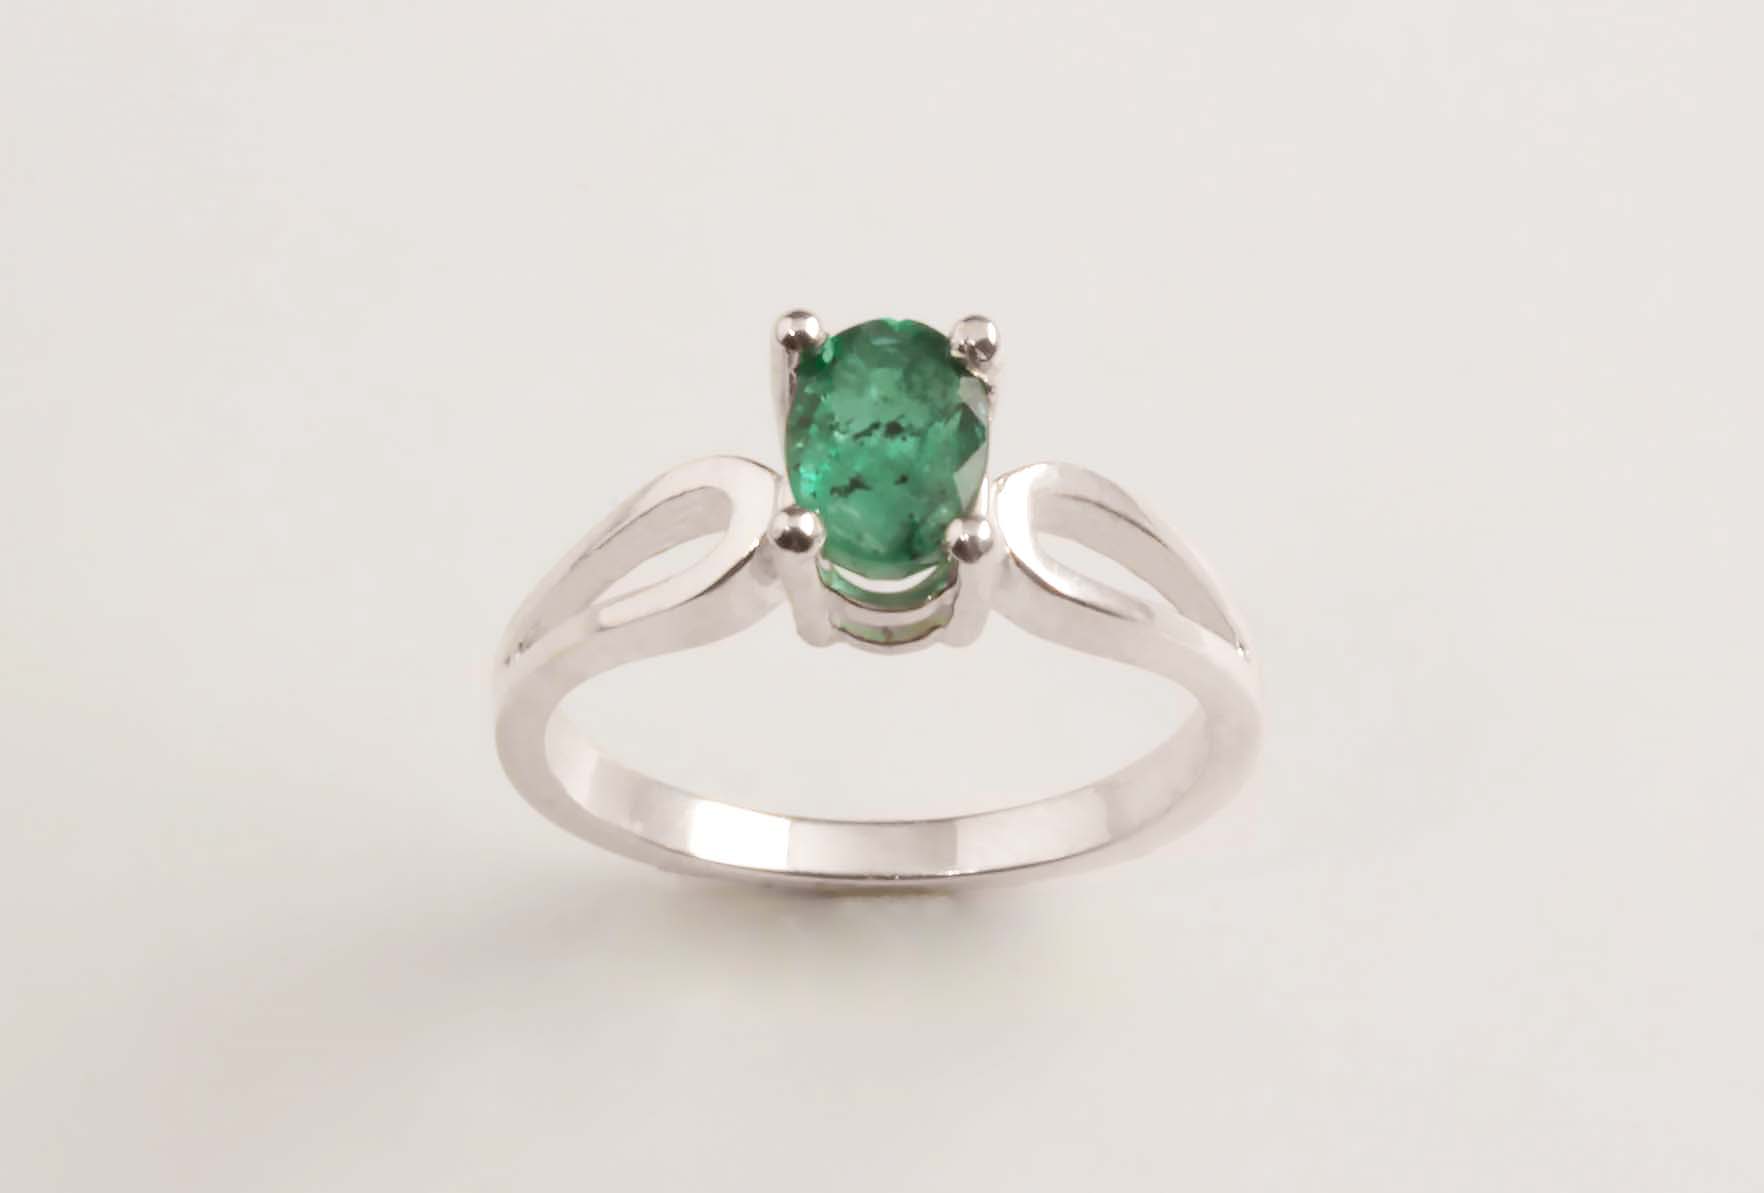 Sterling silver ring w/ emerald. 1.6dwt #12295